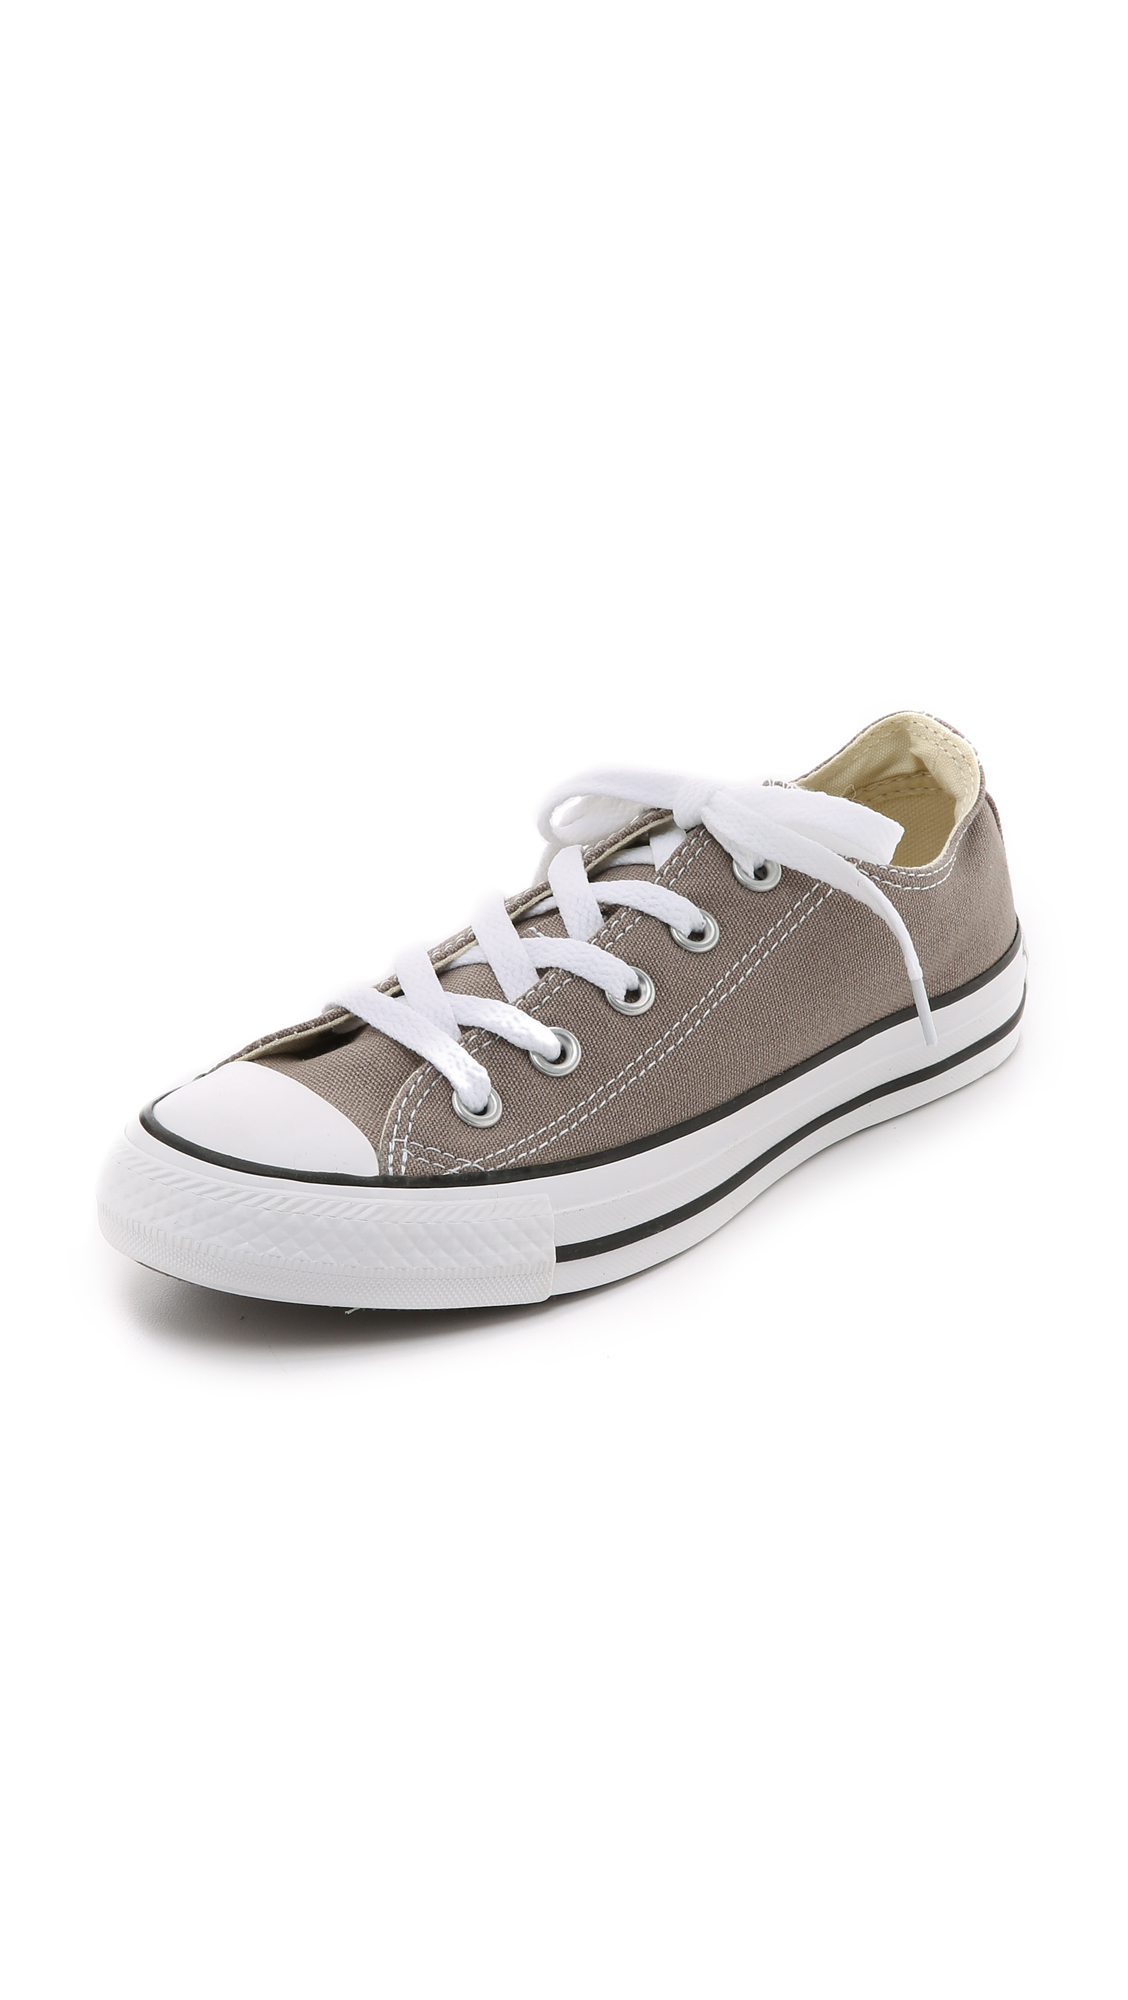 Converse Chuck Taylor All Star Sneakers - Malt in Brown | Lyst